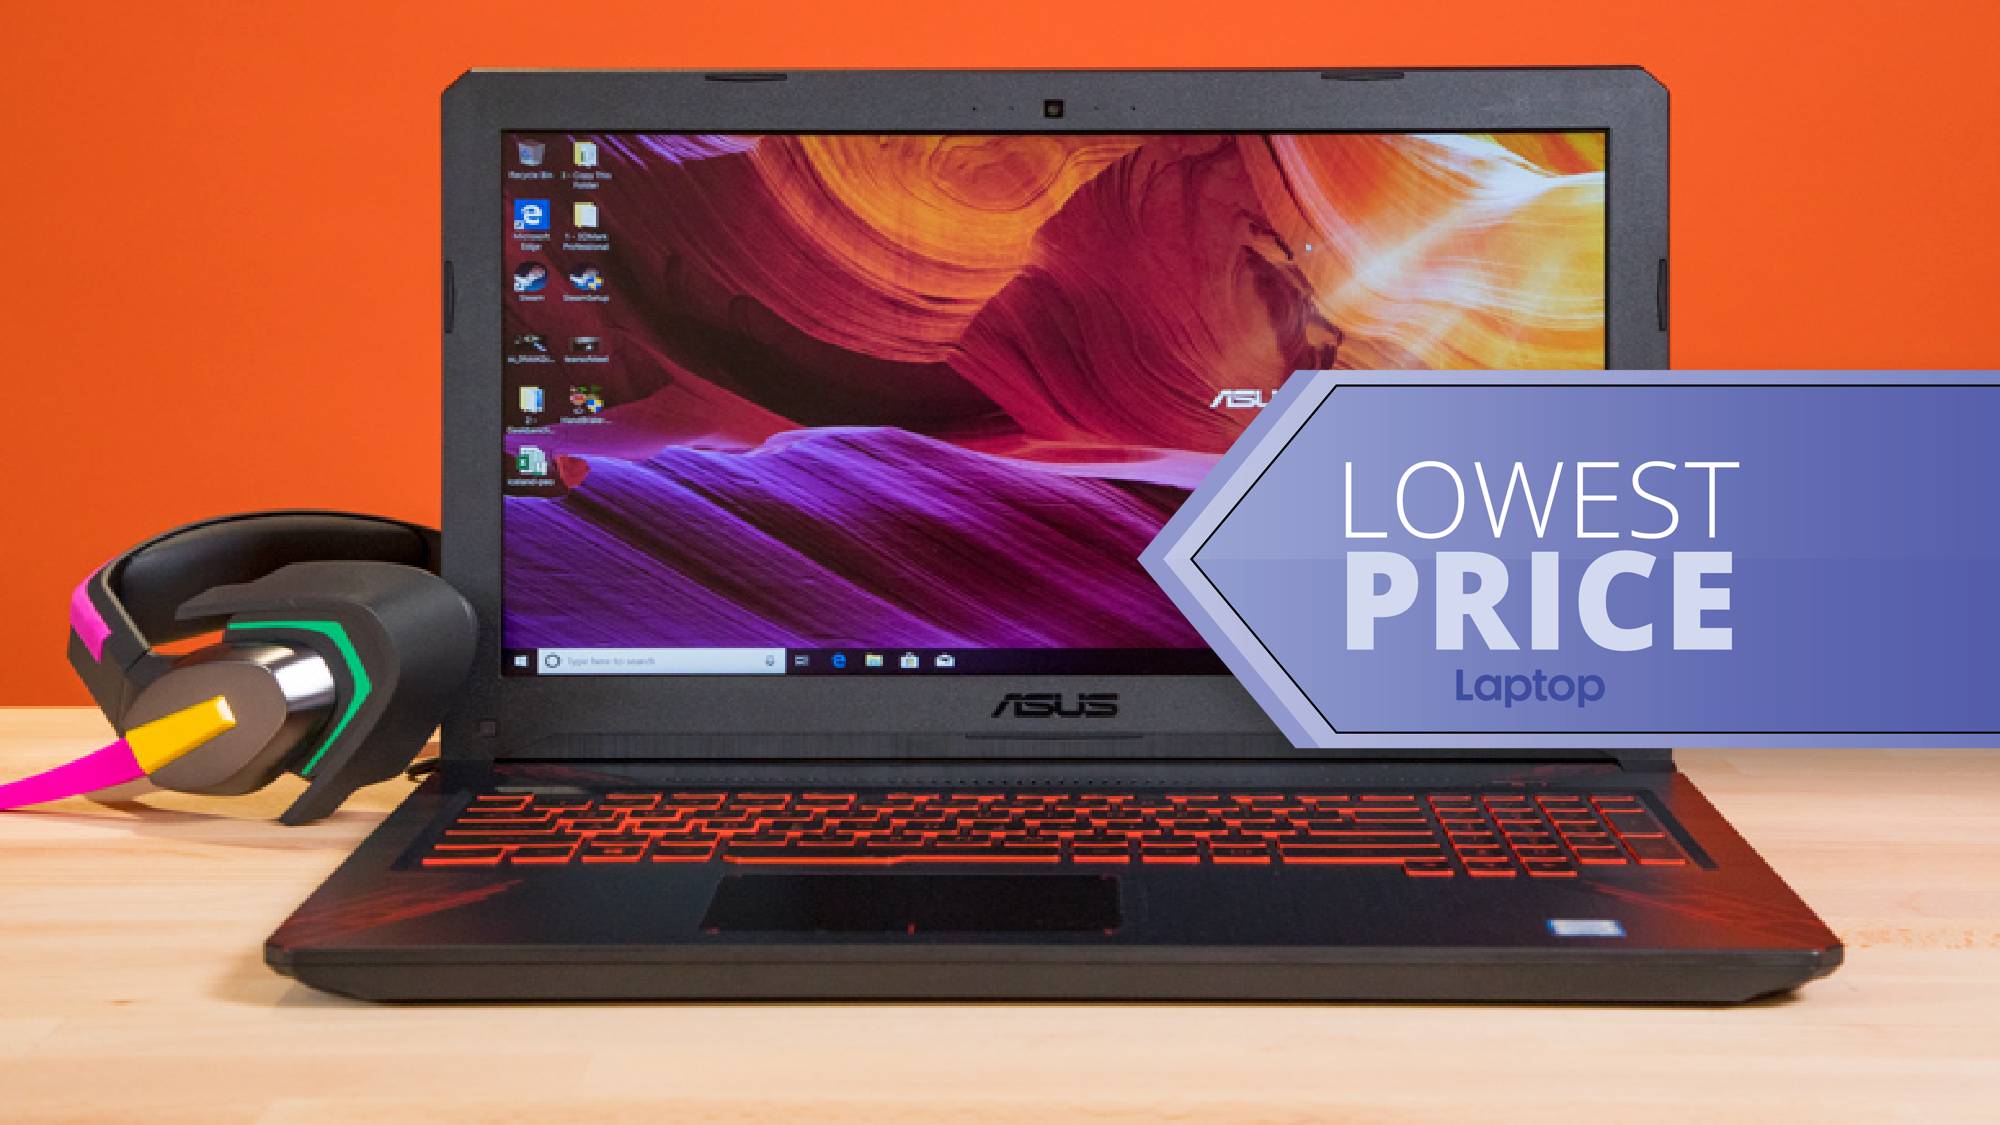 Asus' 17-inch gaming laptop is now $150 cheaper | Laptop Mag